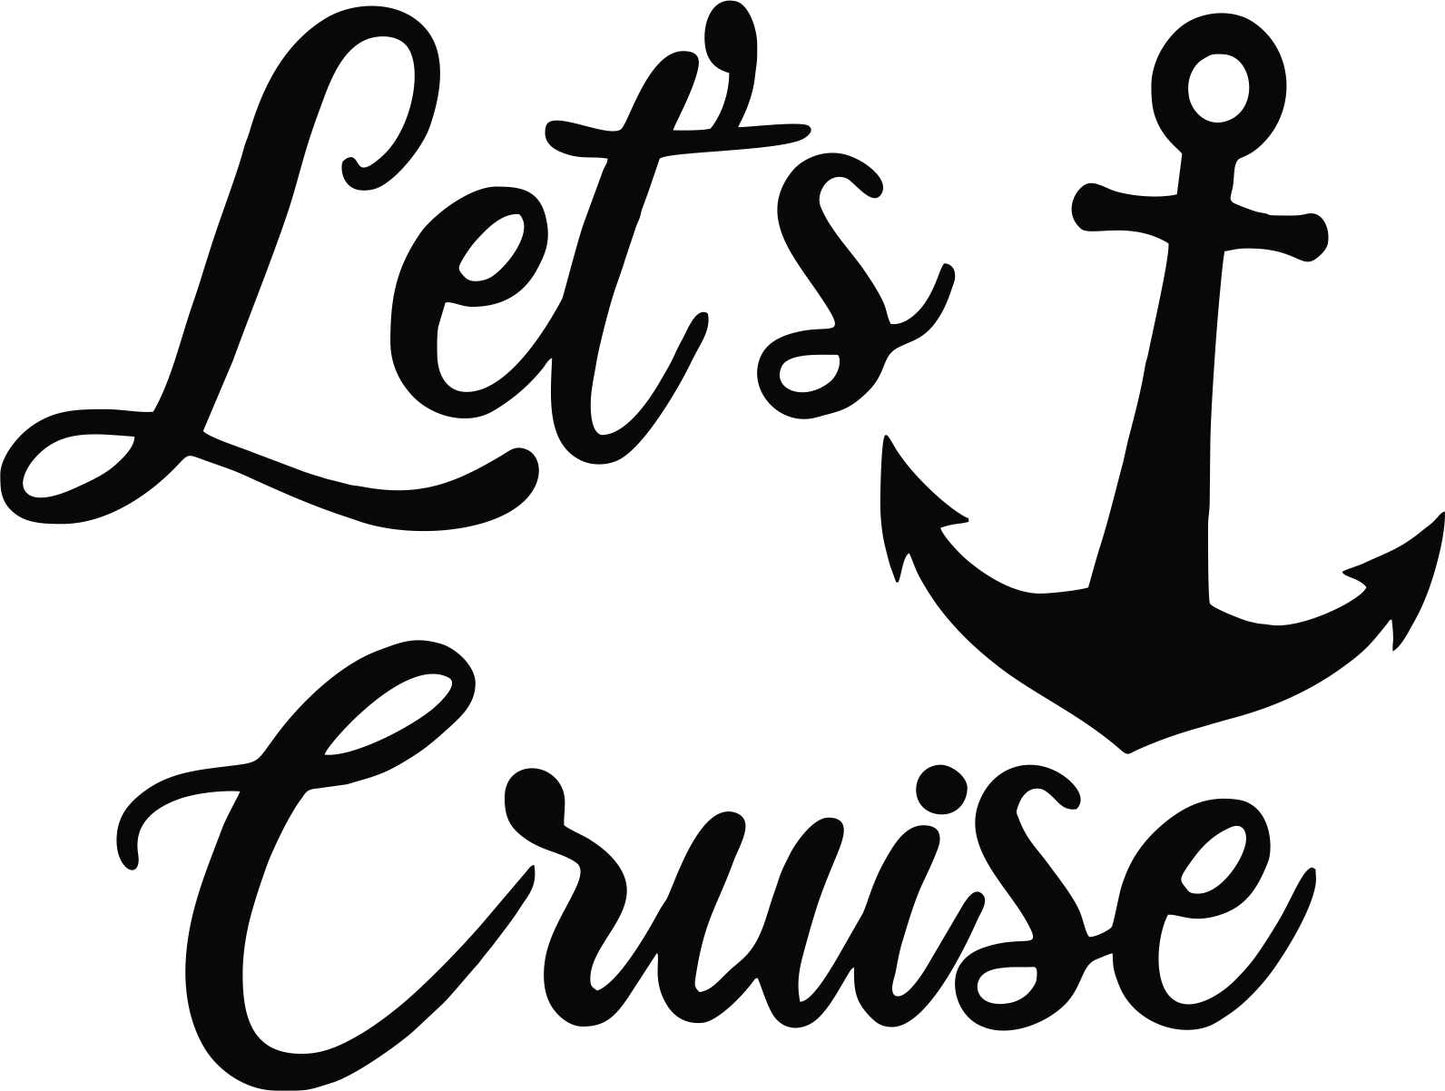 Let's Cruise Decal Sticker